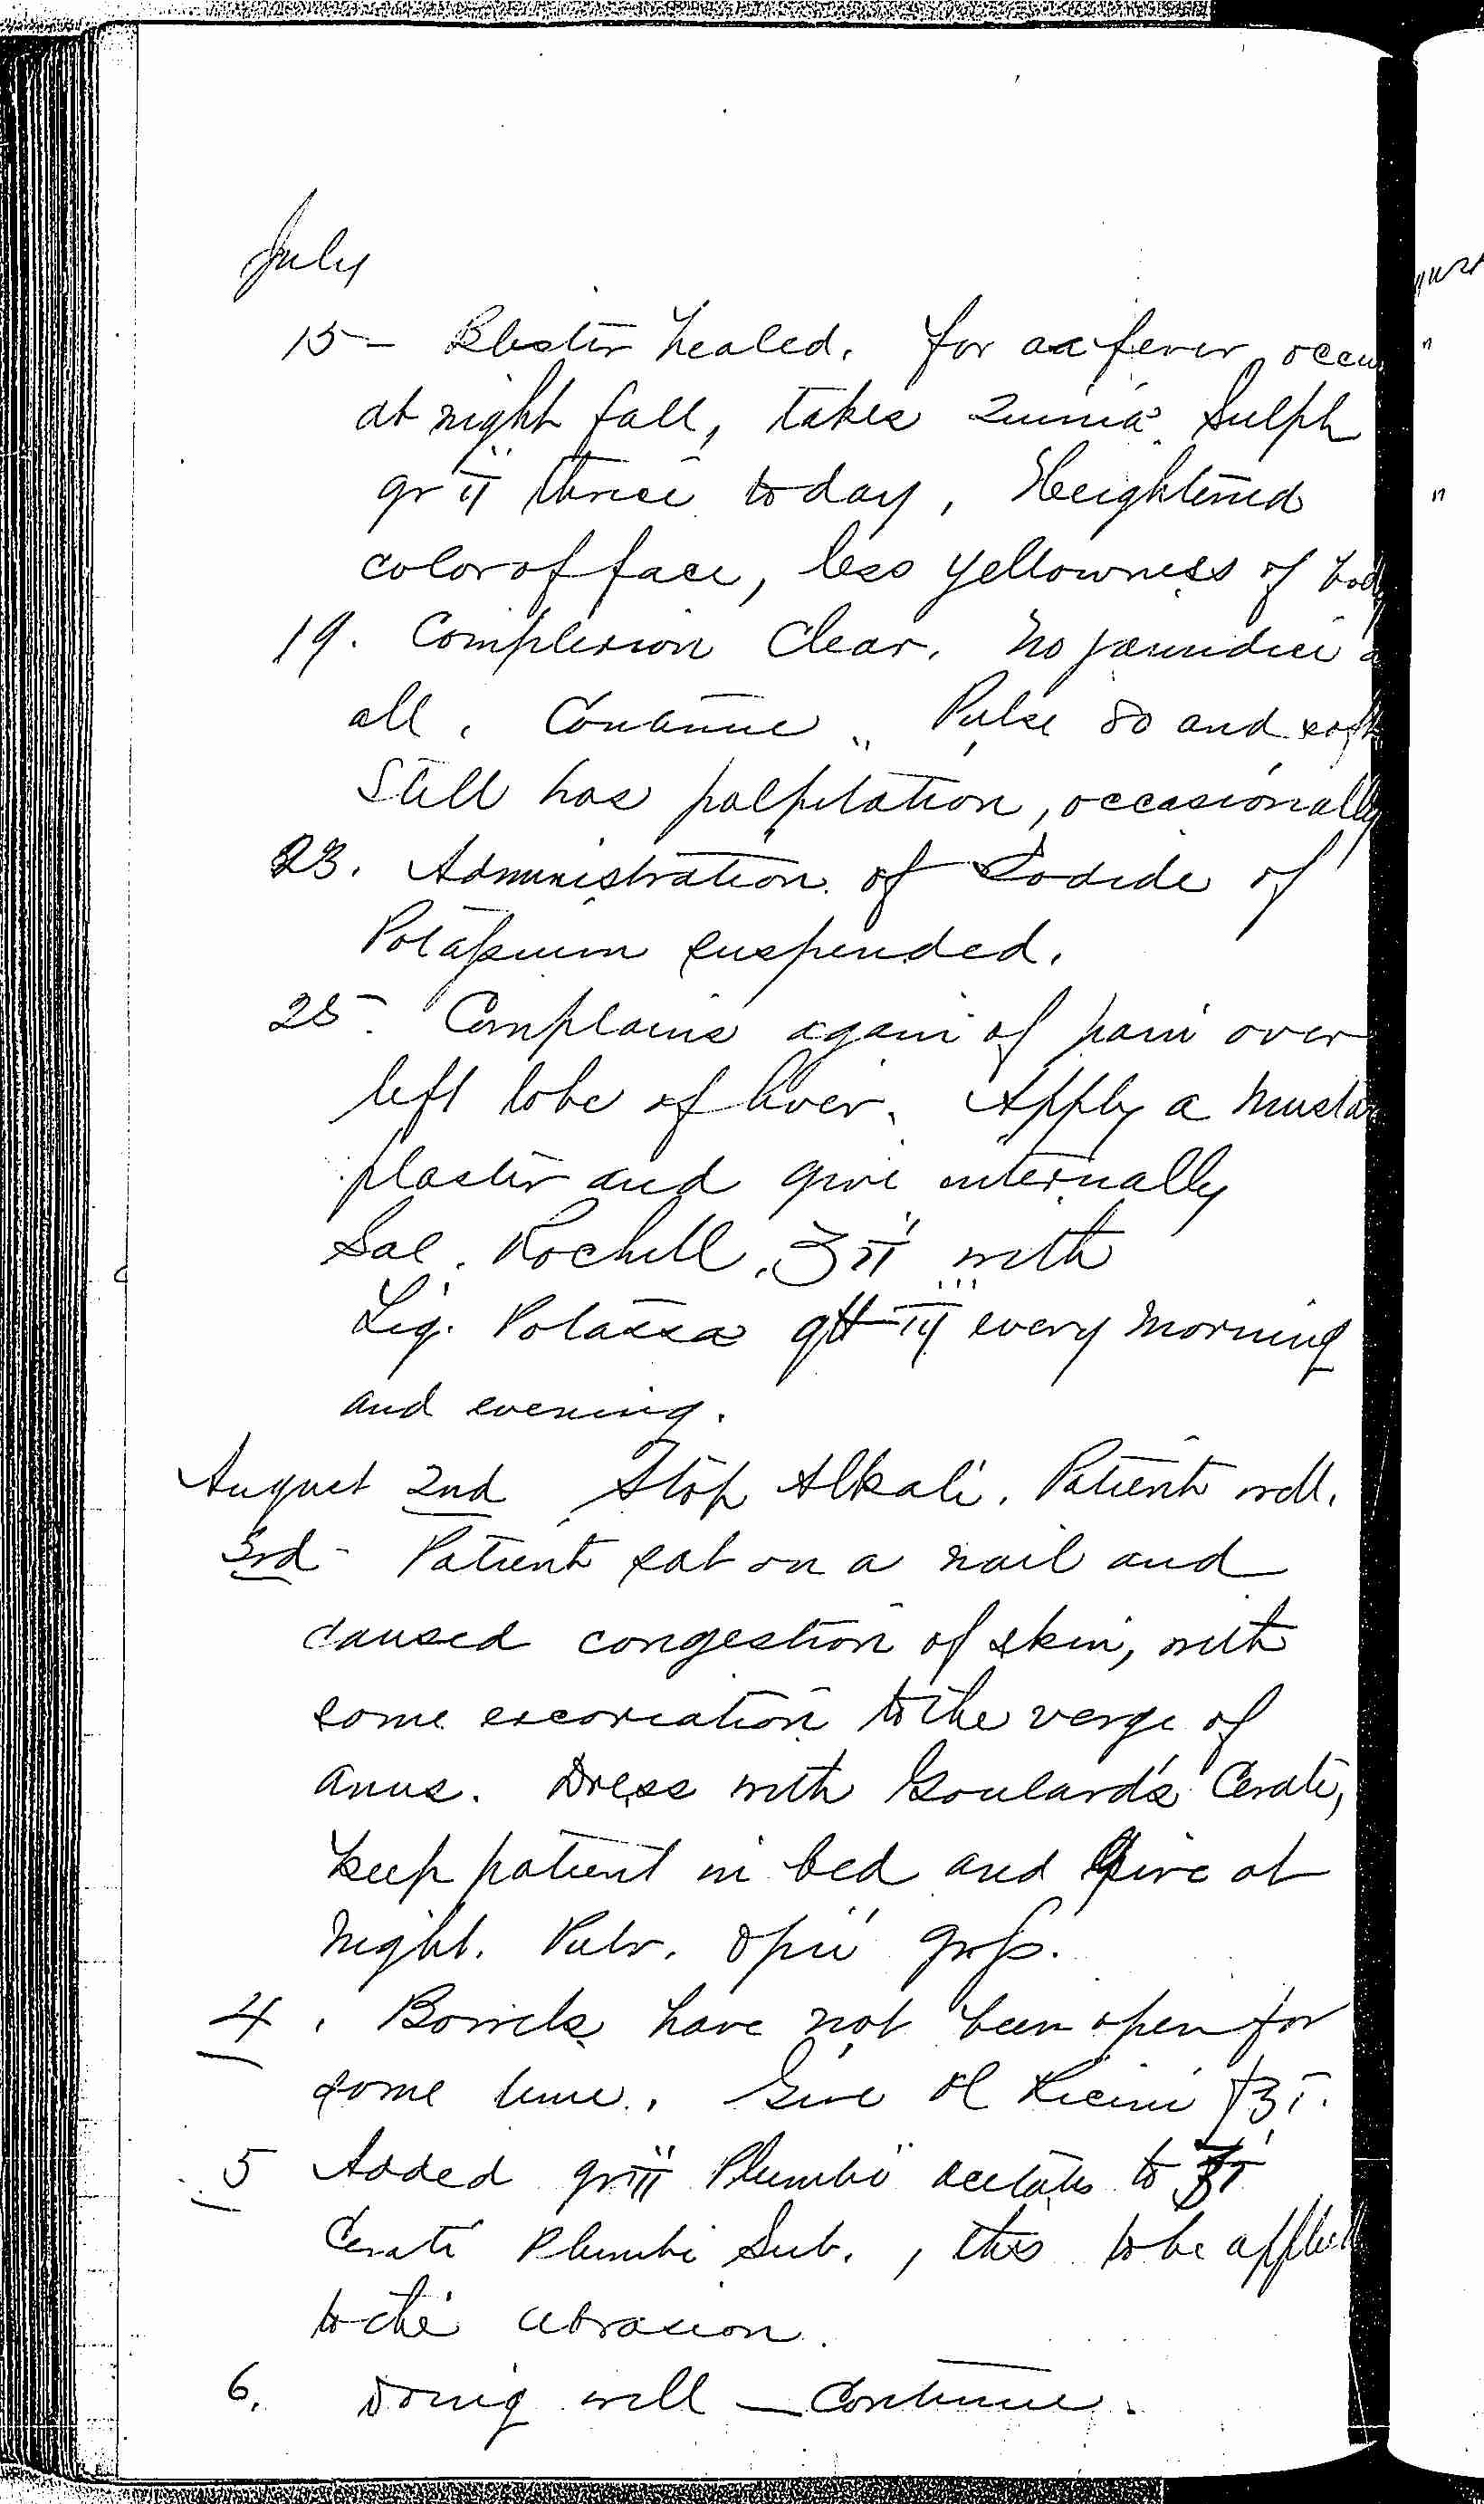 Entry for Richard Hearn (page 6 of 7) in the log Hospital Tickets and Case Papers - Naval Hospital - Washington, D.C. - 1868-69